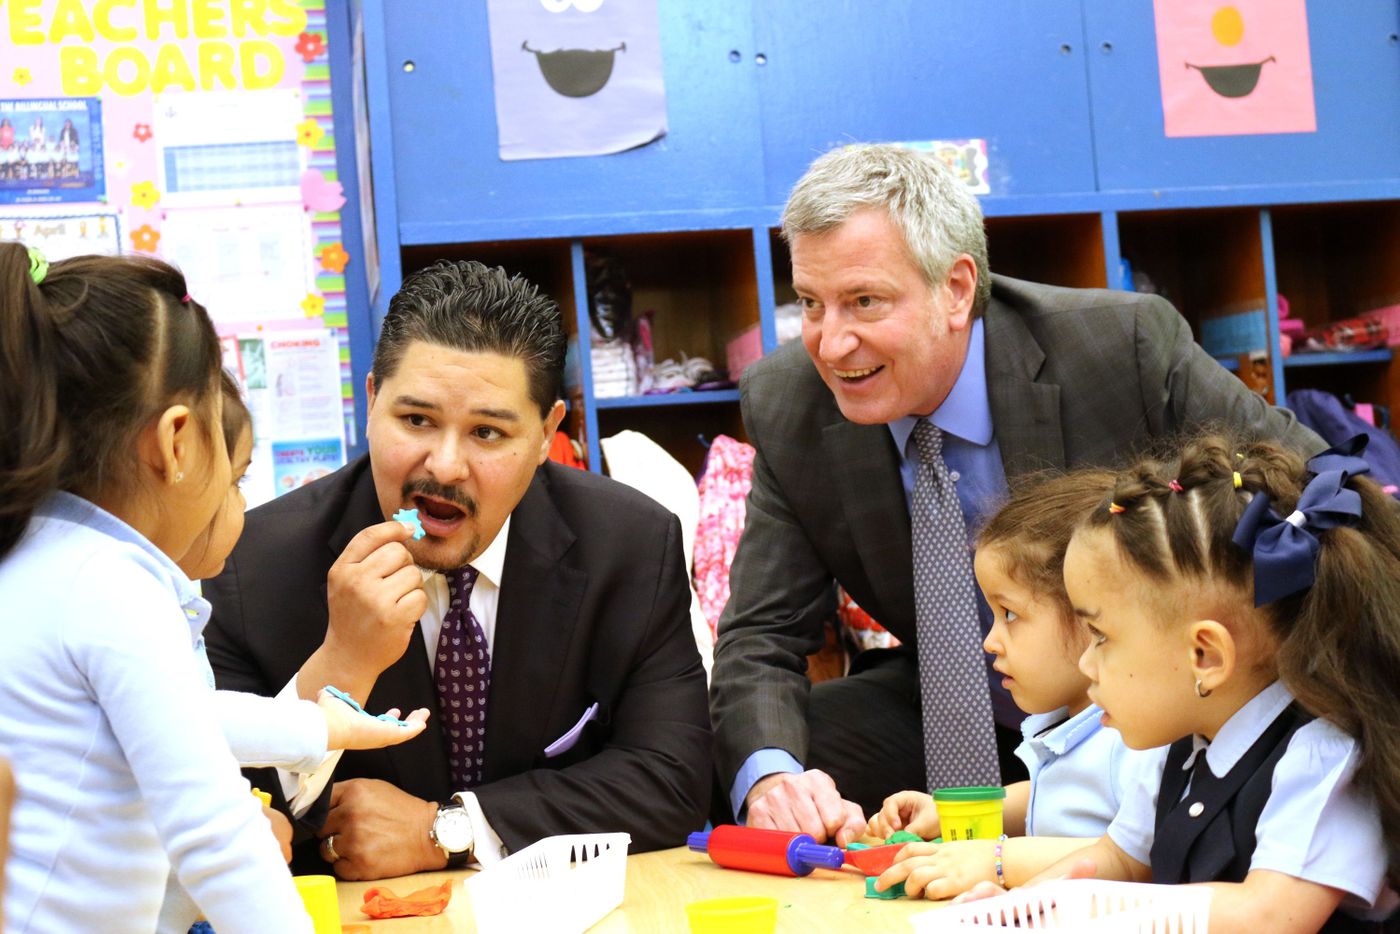 Mayor de Blasio and Schools Chancellor Richard Carranza mingle with Pre-K students at PS 25 in The Bronx in April 2018.